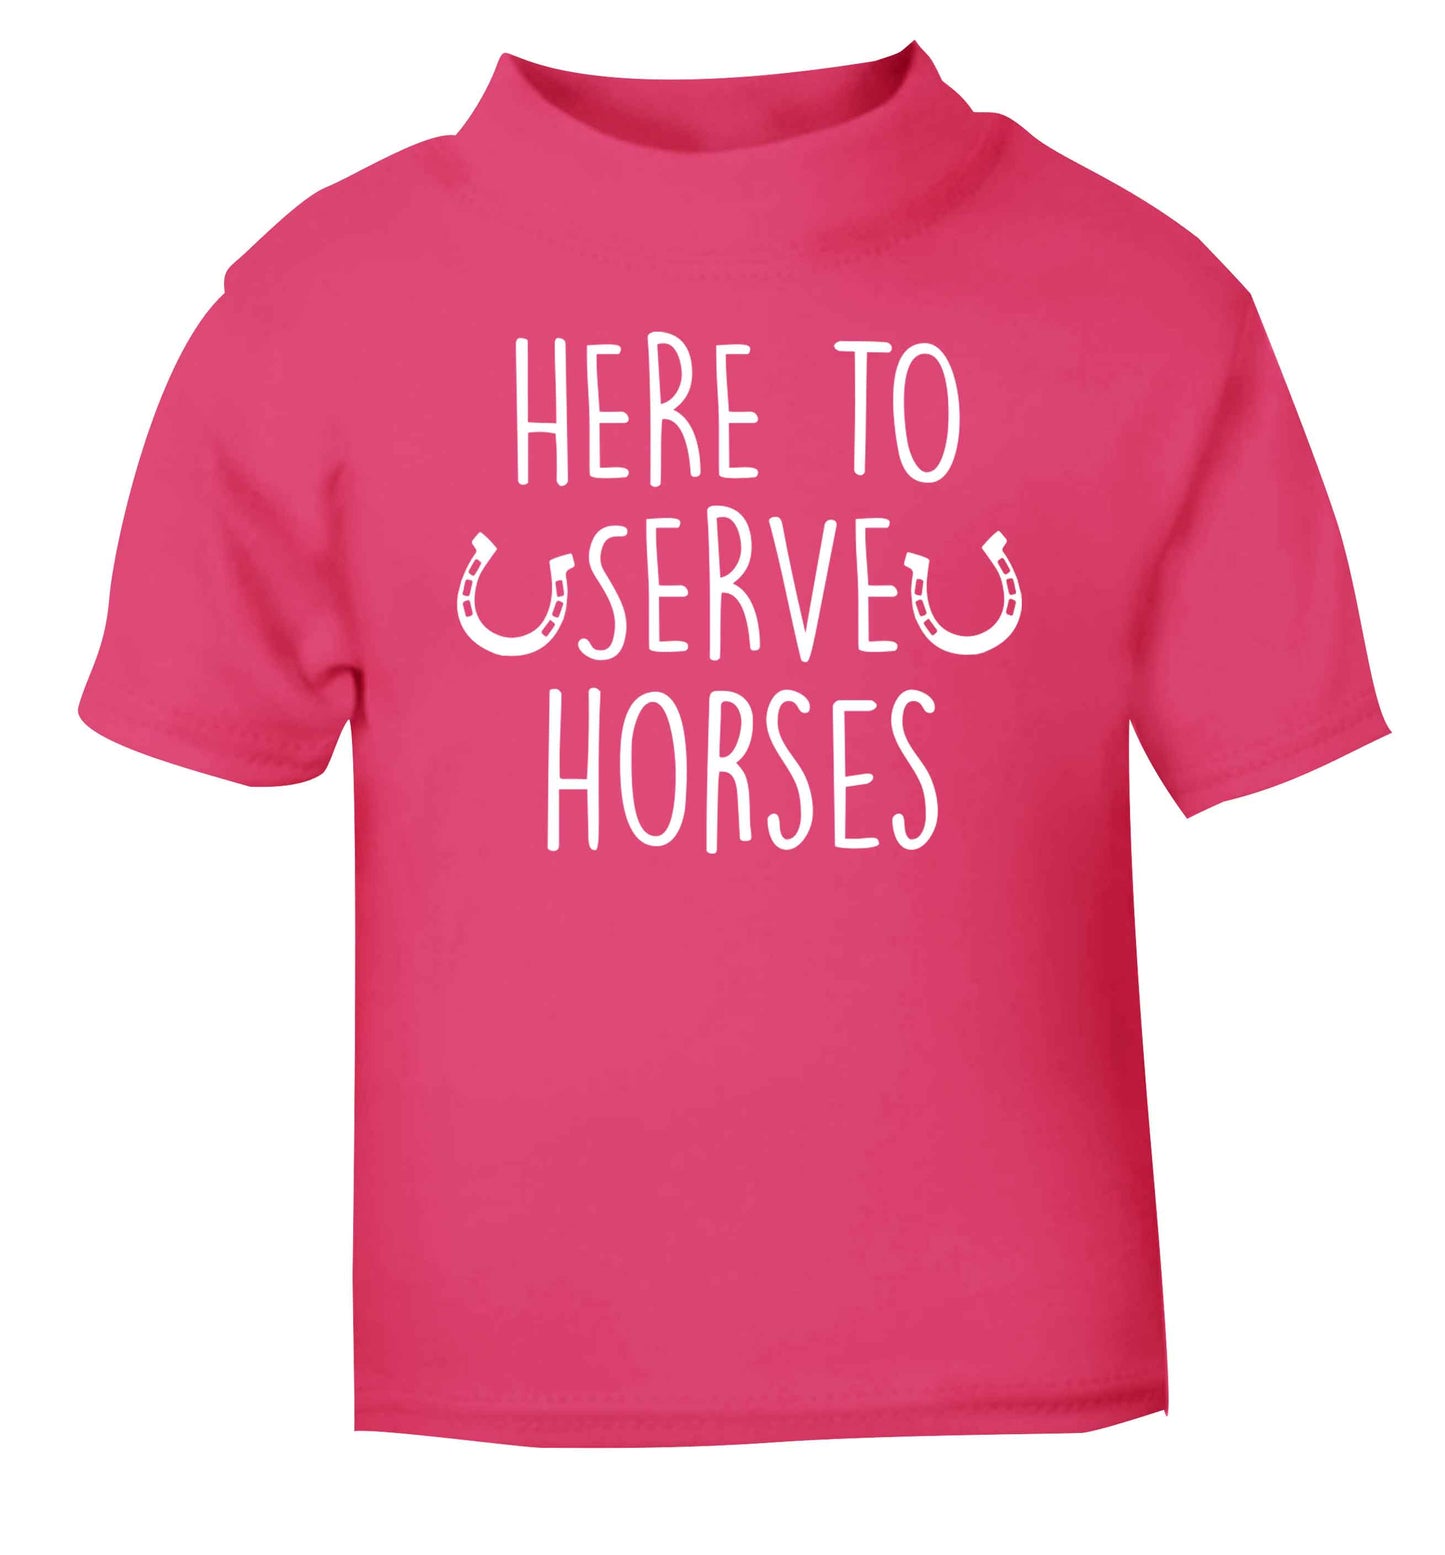 Here to serve horses pink baby toddler Tshirt 2 Years